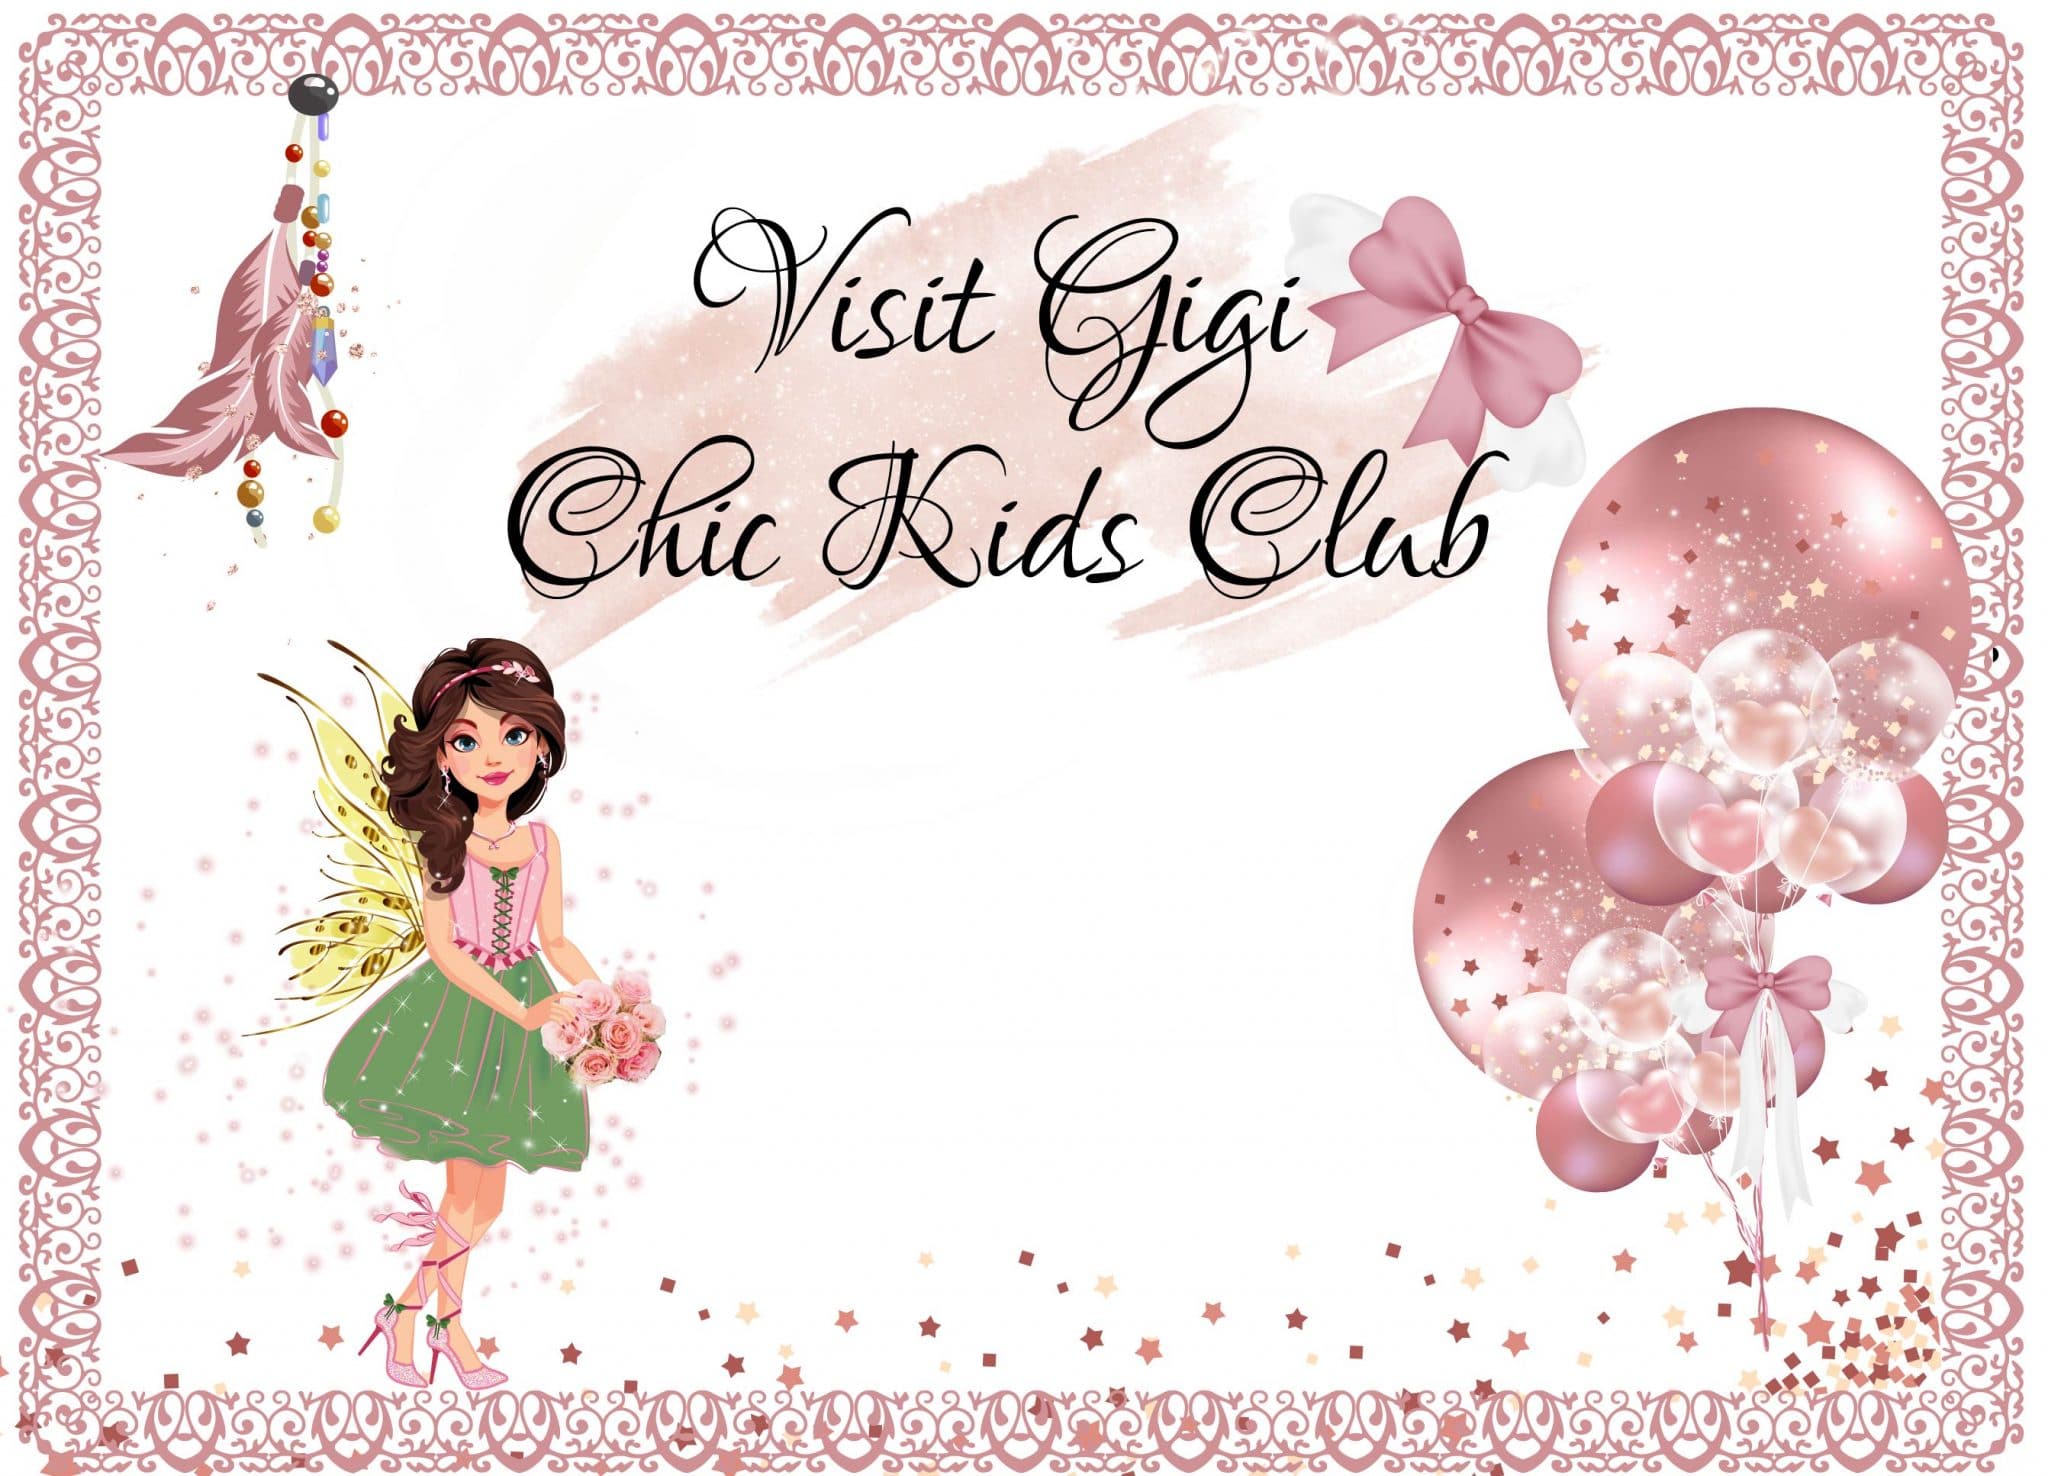 banner for kids club